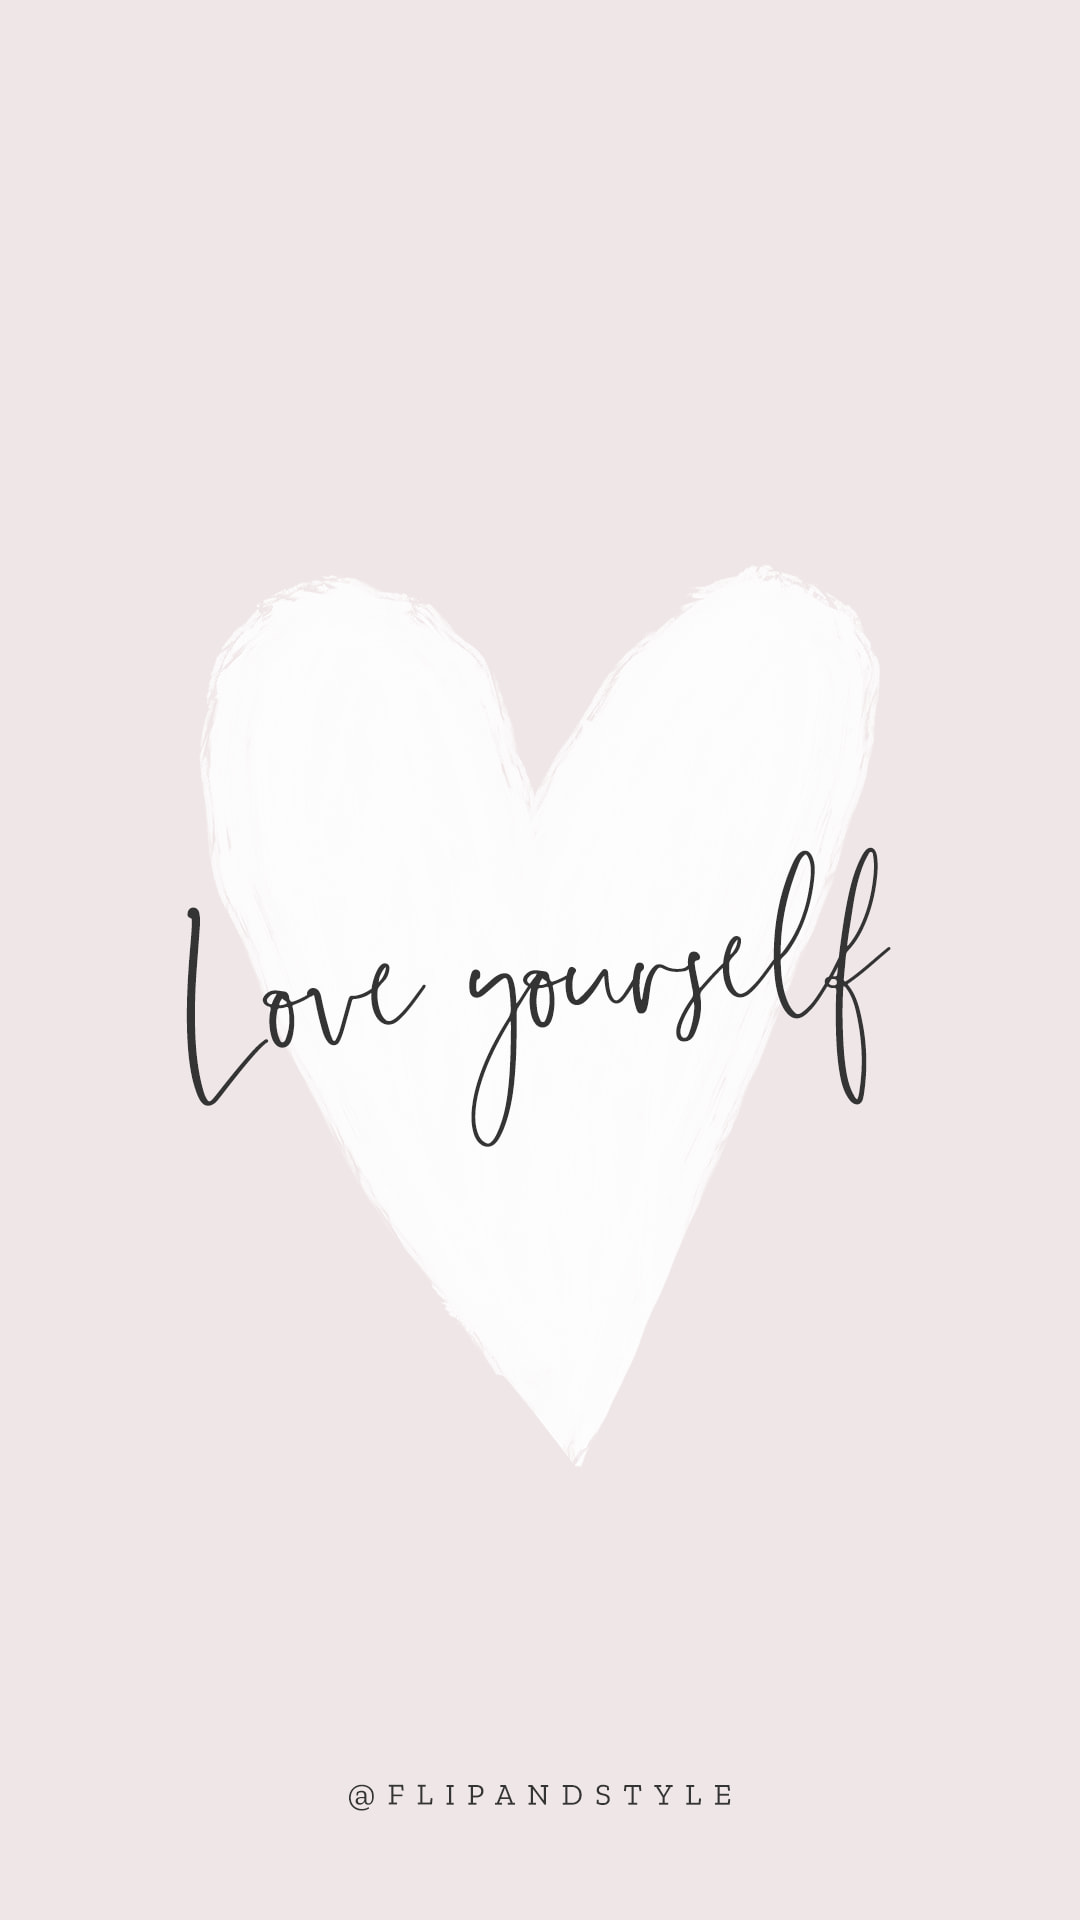 Love Yourself Iphone Wallpapers